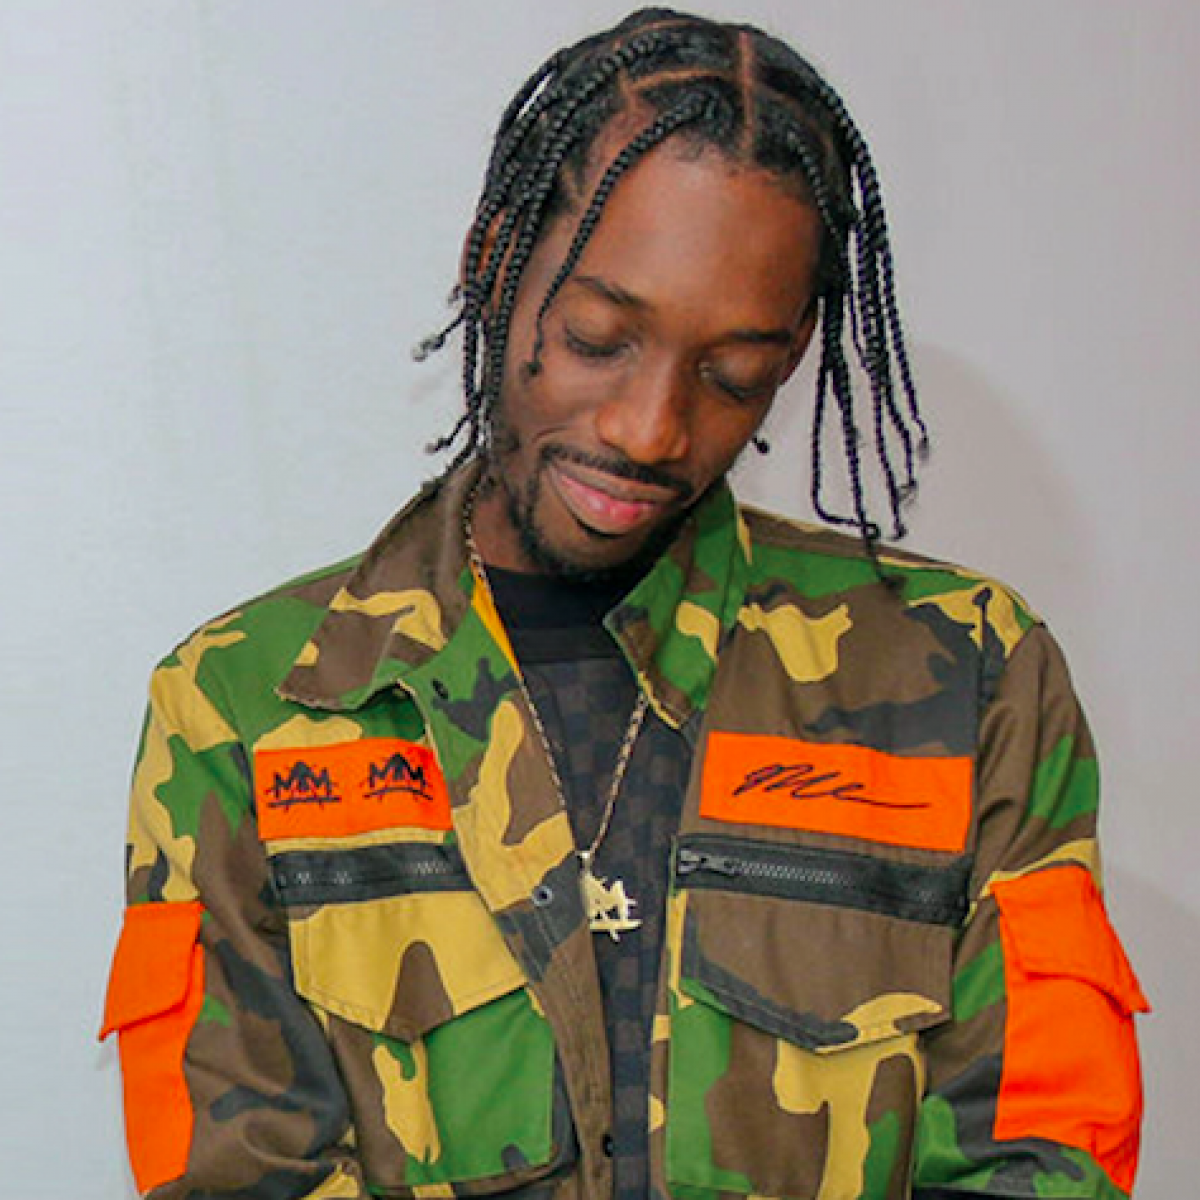 Bronx Designer Mugzy McFly Grew His Global Clothing Brand With No Investors. Here’s How